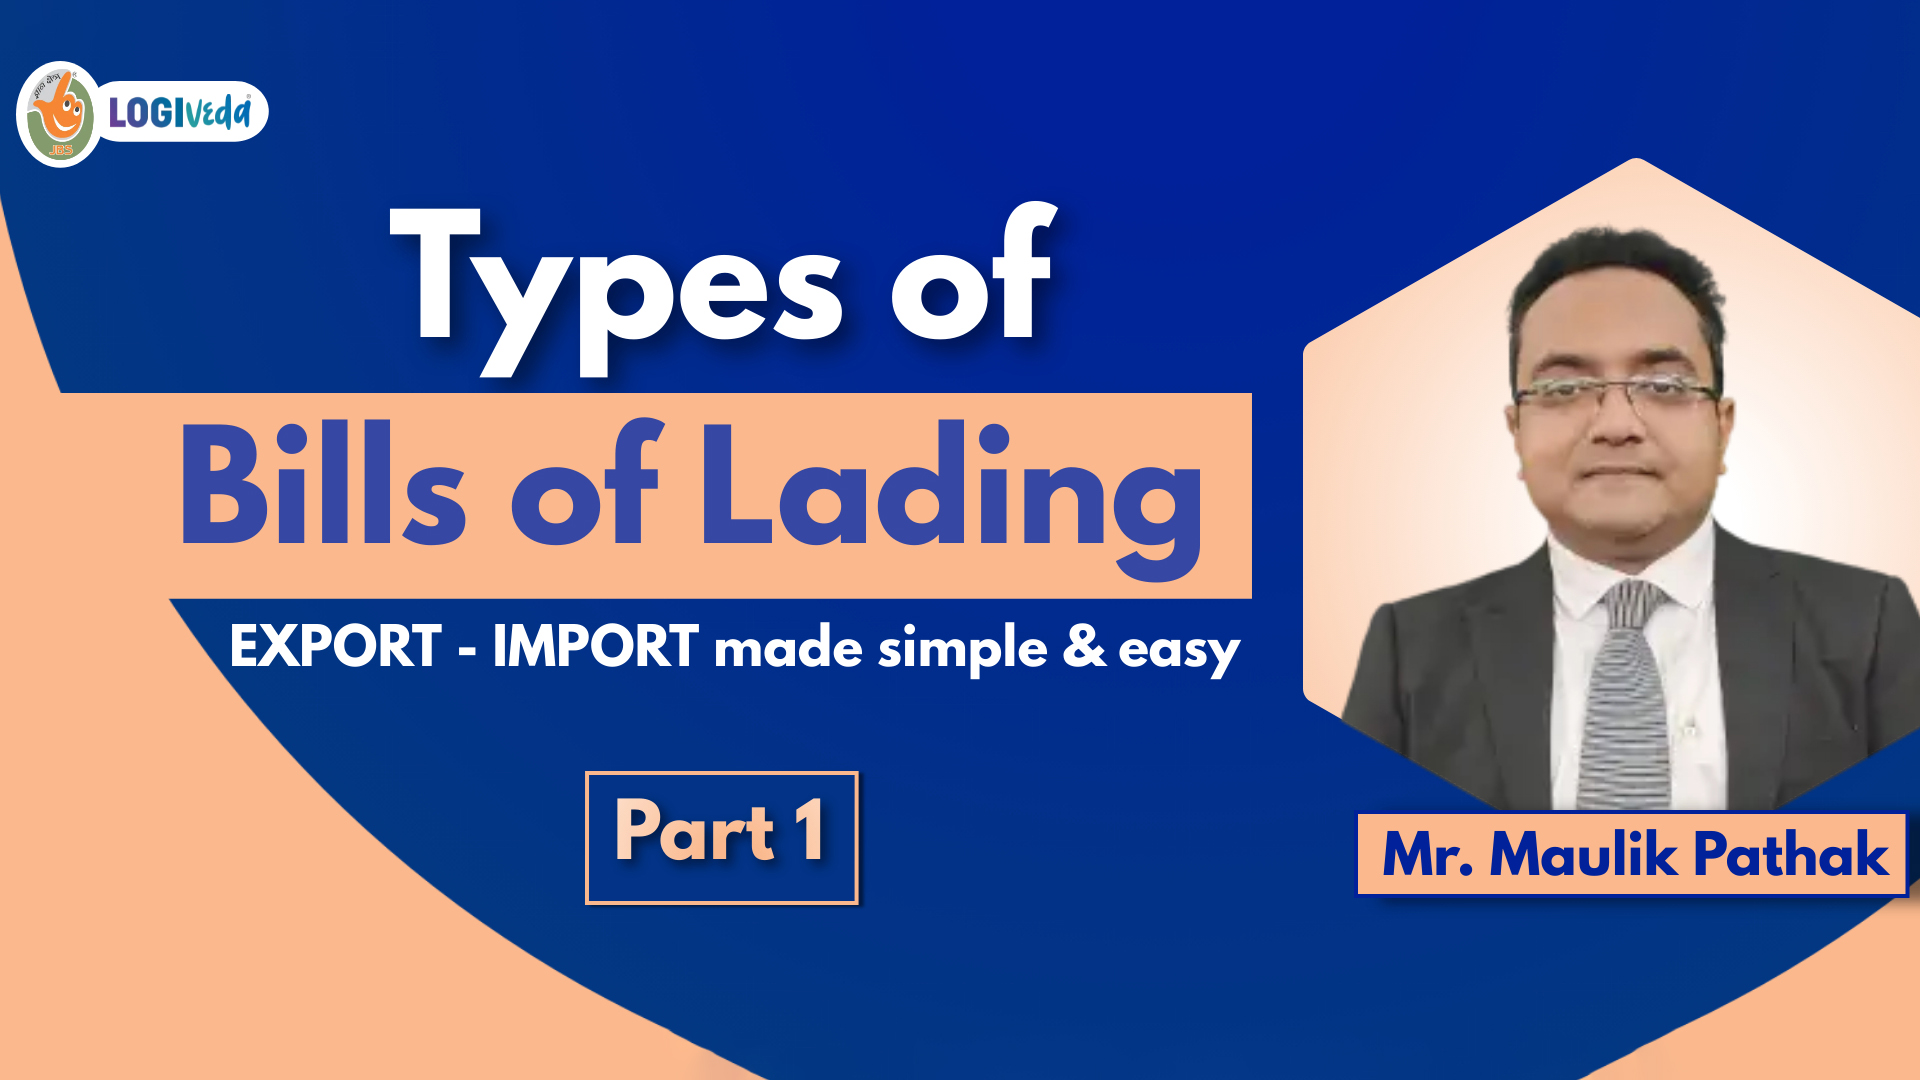 Types of Bills of Lading | Export - Import made simple and easy | Part 1 | Mr. Maulik Pathak